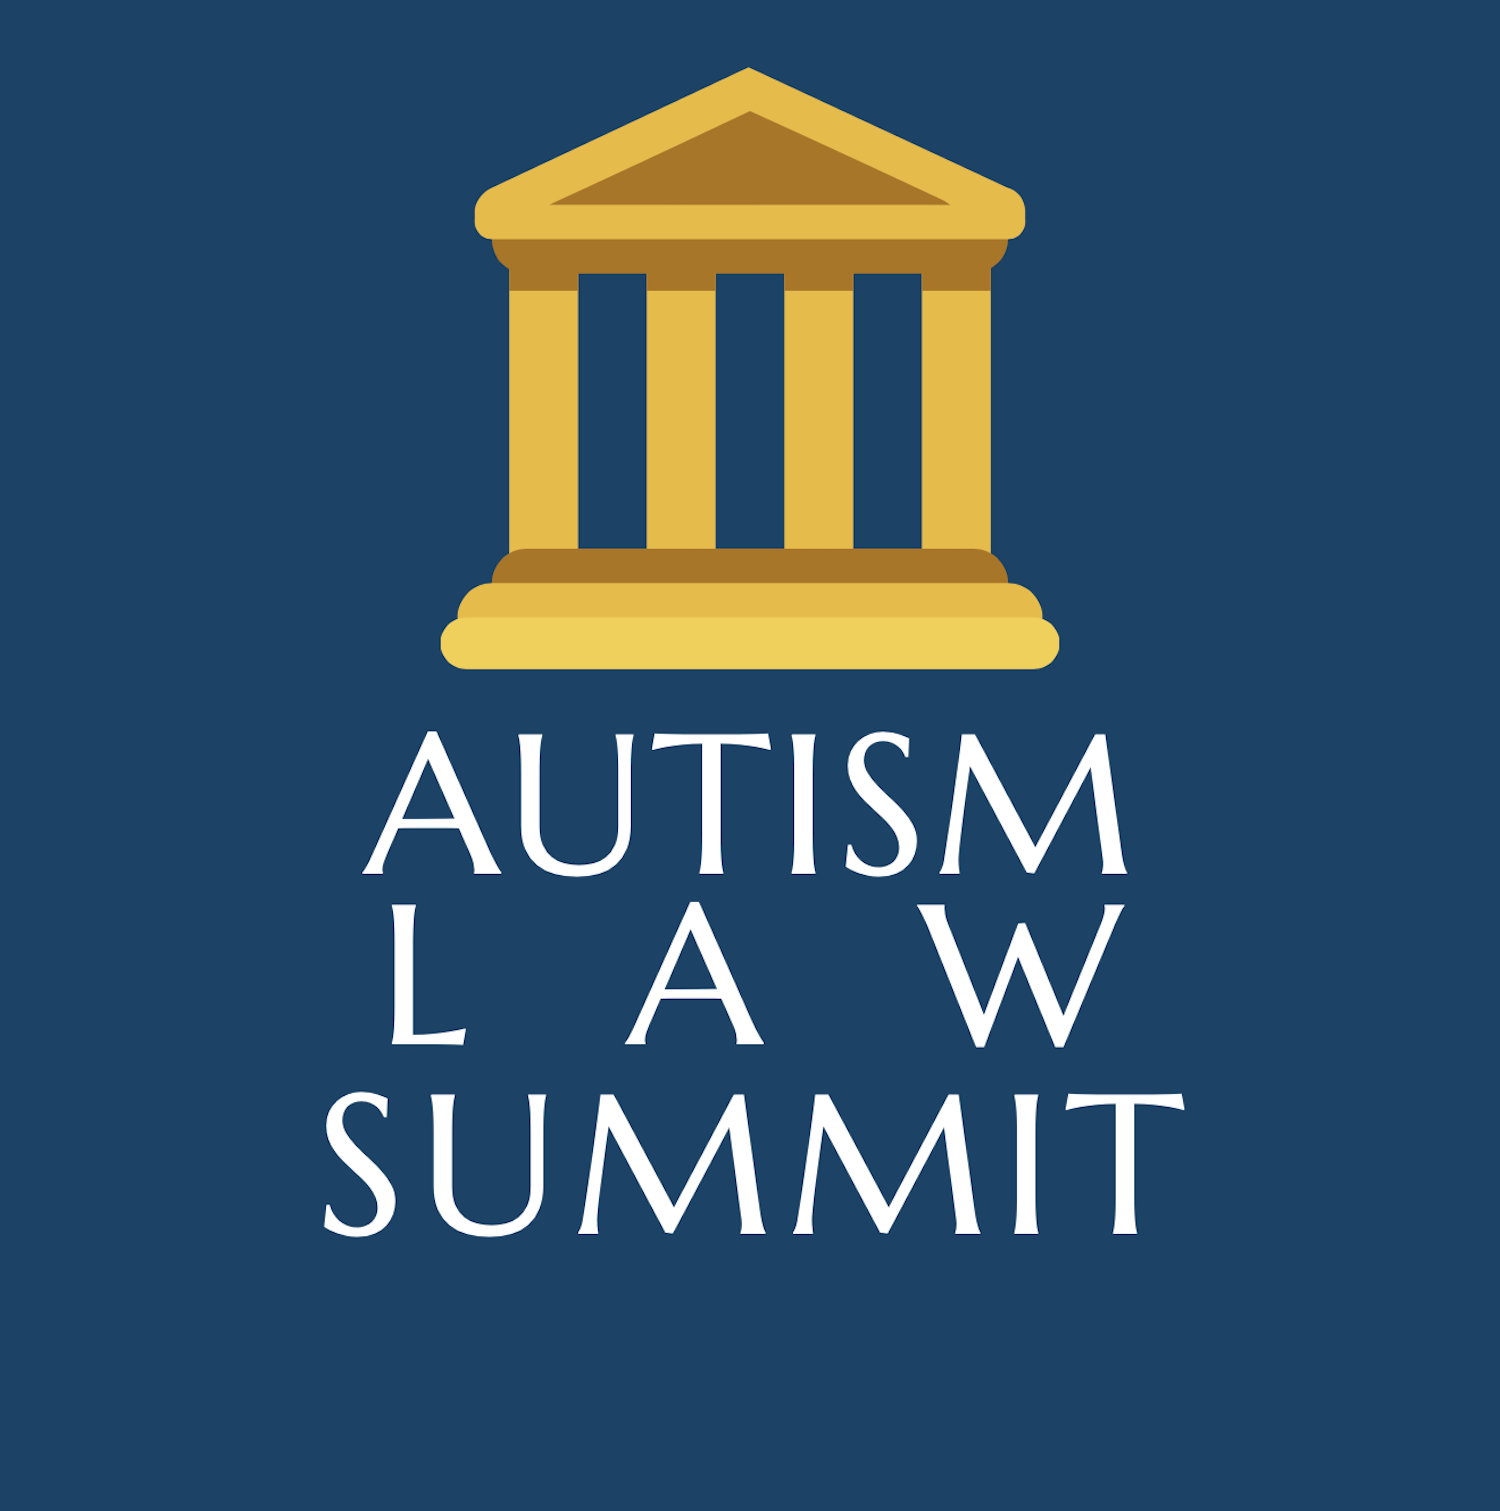 The Autism Law Summit